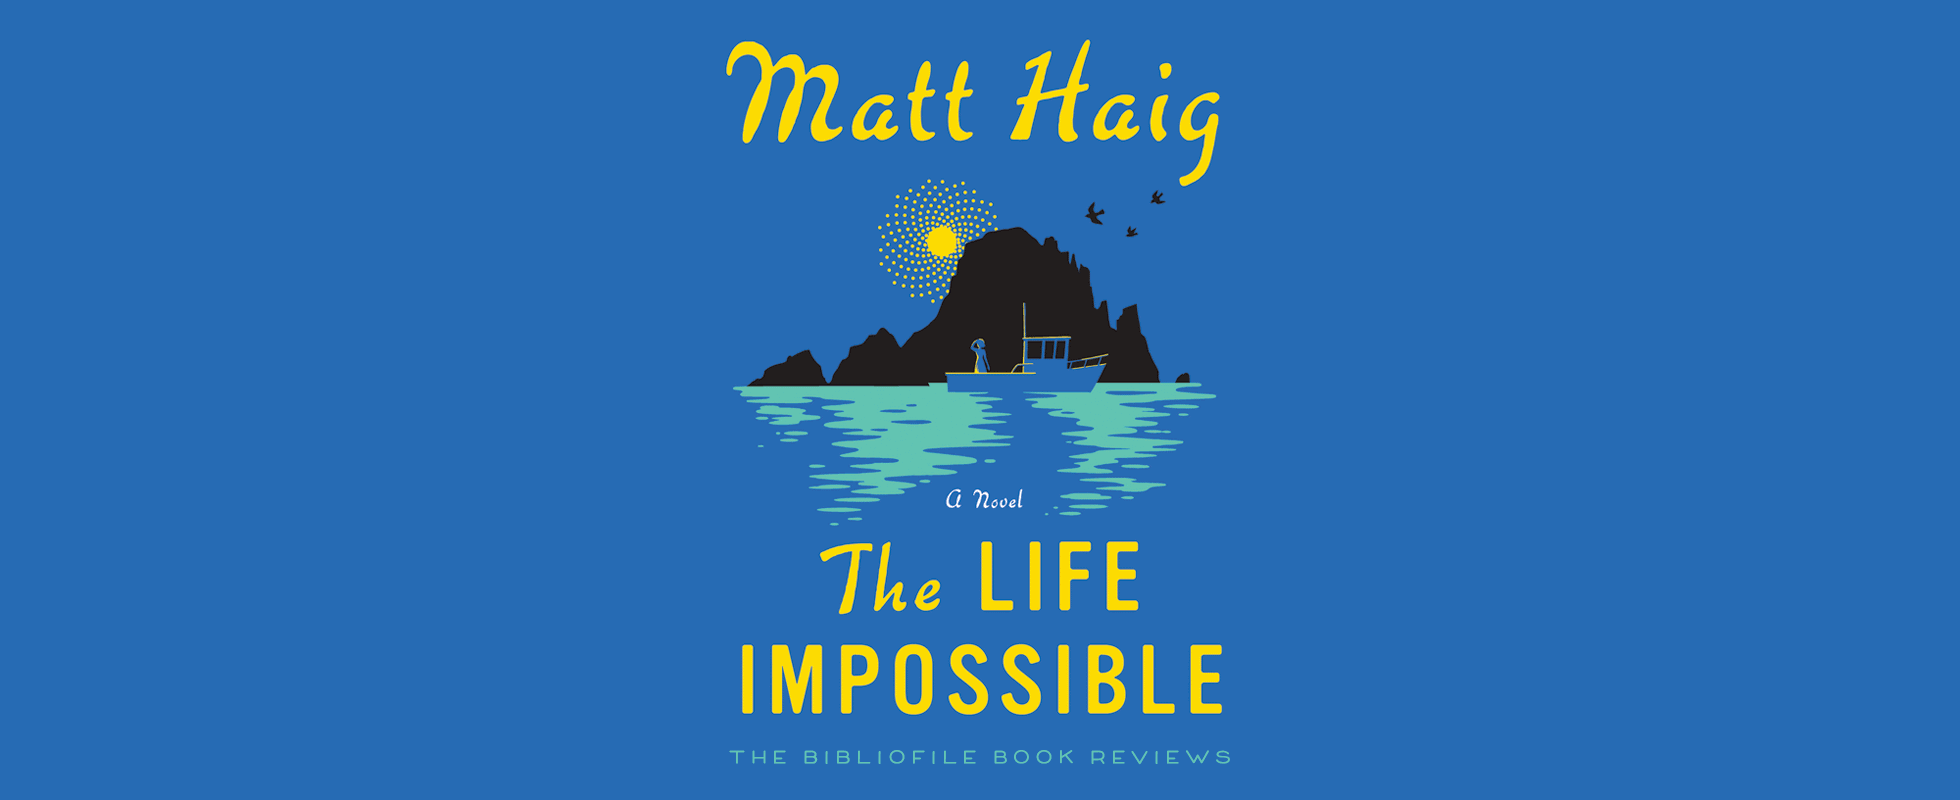 the life impossible matt haig book review plot summary synopsis recap discussion spoilers